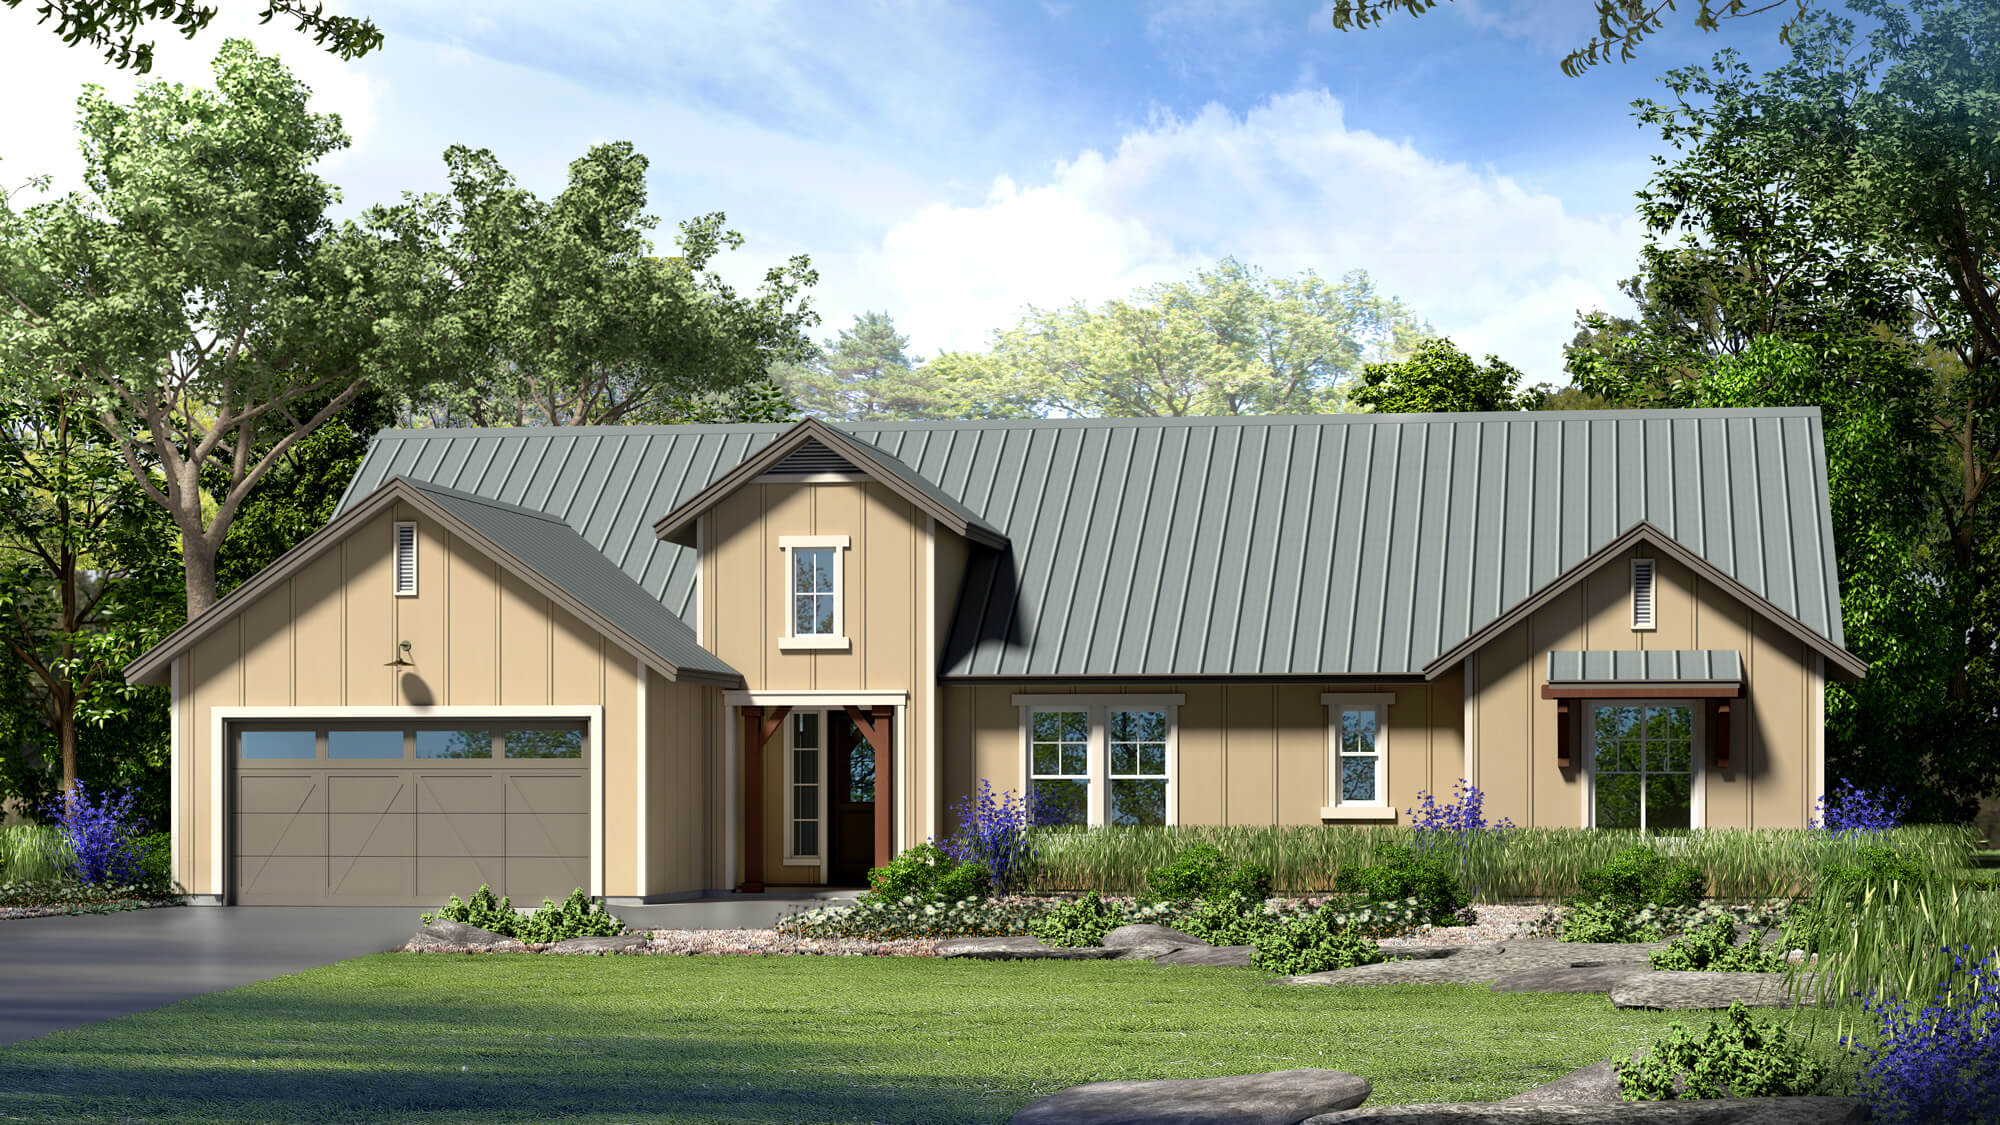 Exterior Rendering - Single Family House